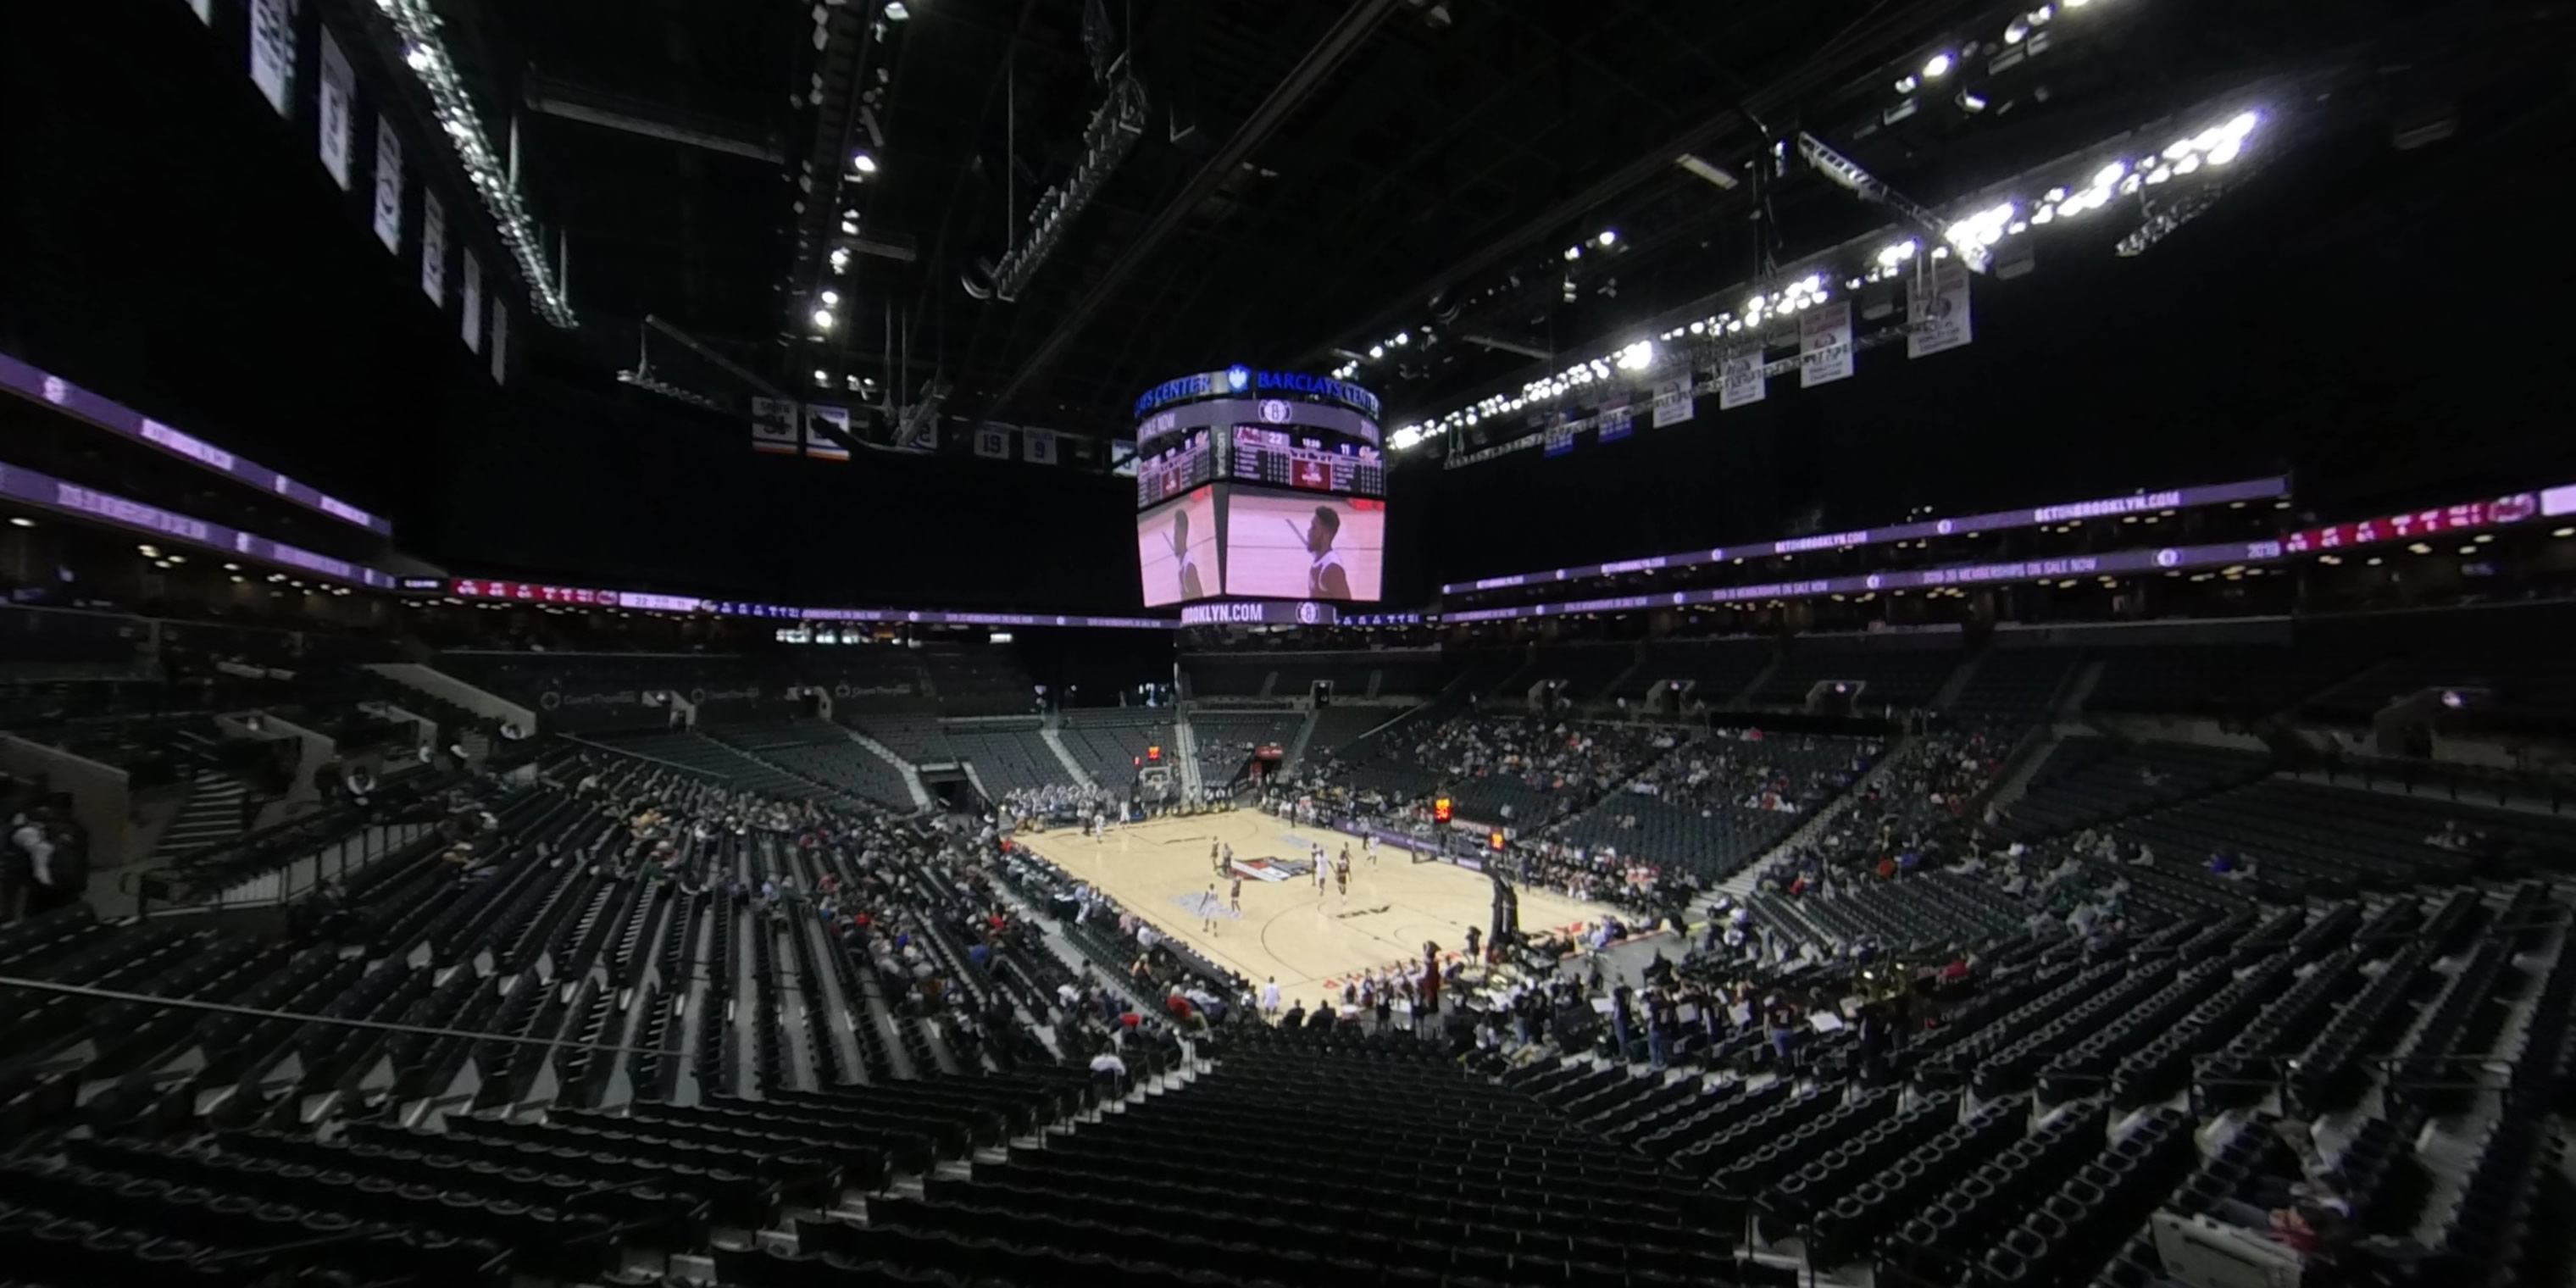 section 118 panoramic seat view  for basketball - barclays center